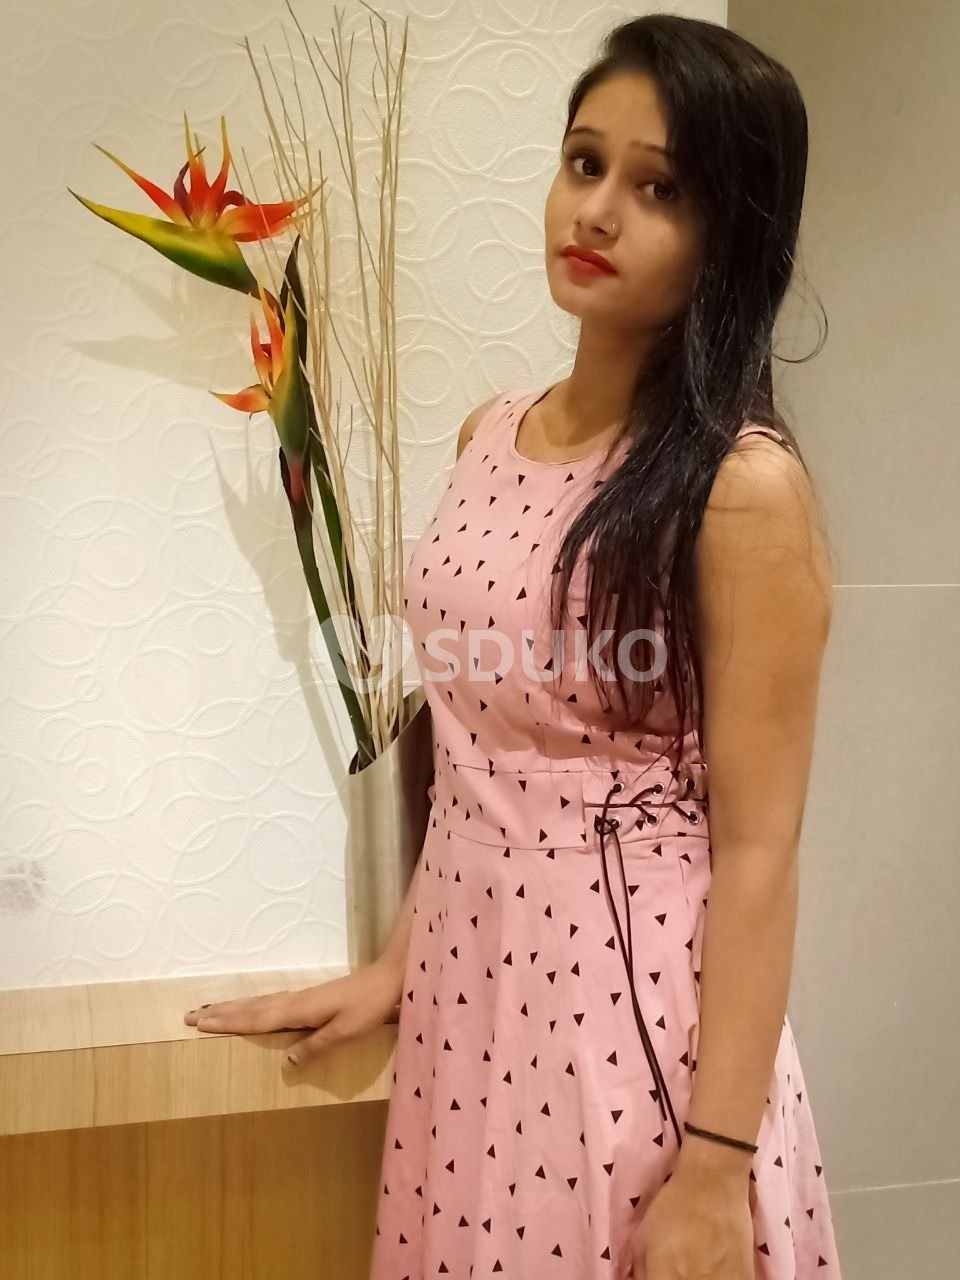 YELAHANKA ✅ 24x7 AFFORDABLE CHEAPEST RATE SAFE CALL GIRL SERVICE AVAILABLE OUTCALL AVAILABLE